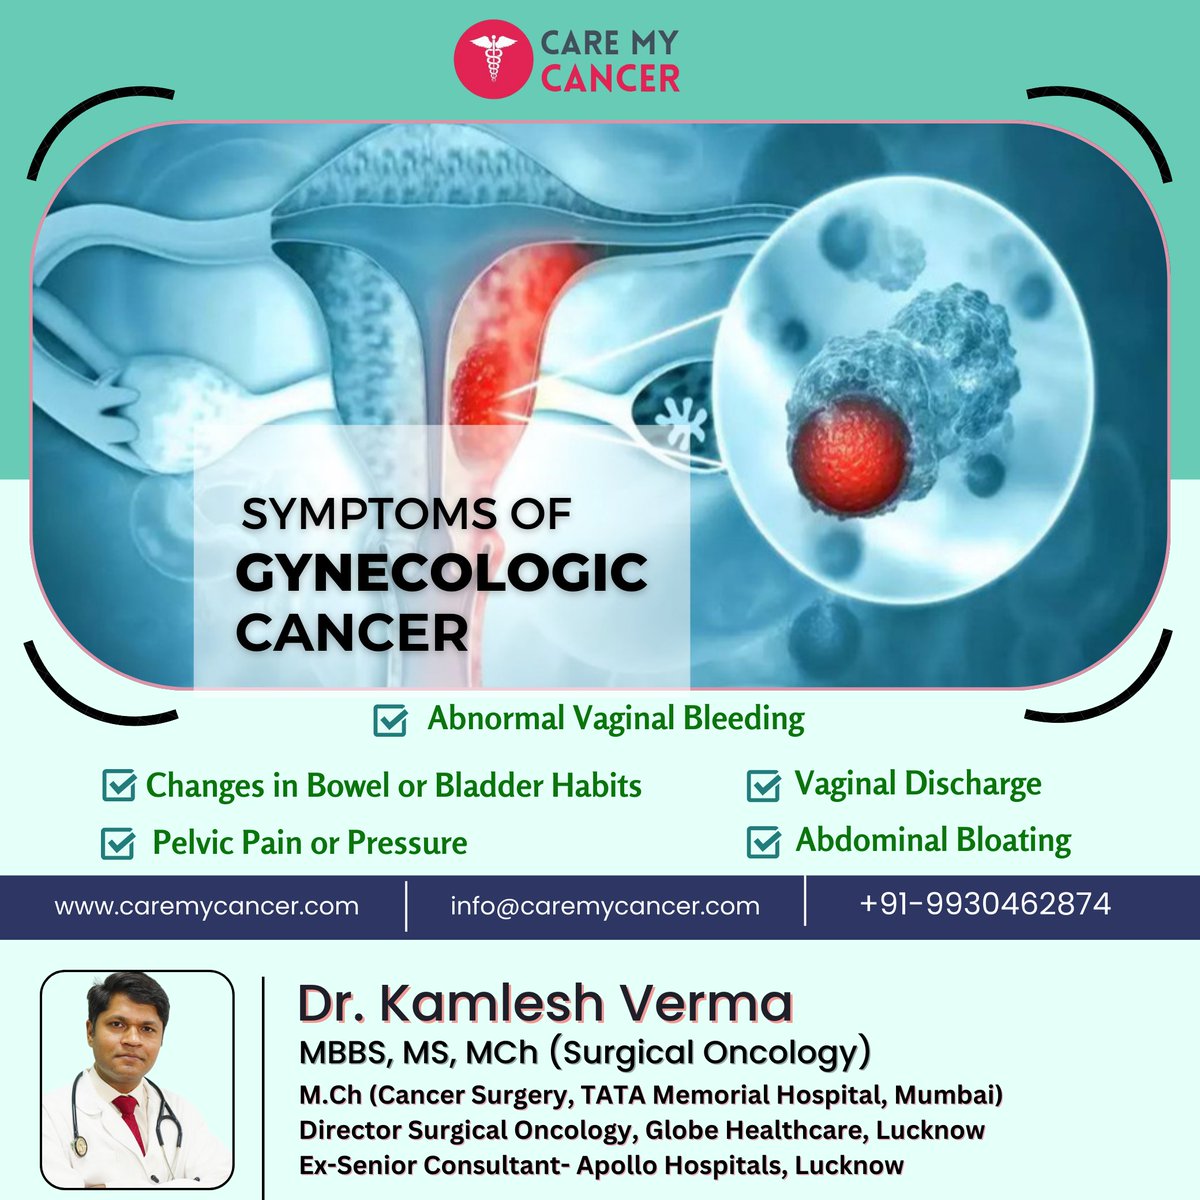 🔍 Recognizing the signs of gynecological cancer is crucial for early detection and treatment. 🩺 Learn more from Dr. Kamlesh Verma about the Symptoms of Gynecological Cancer. 

#WomensHealth #CancerAwareness #GynecologicalCancer  #Cancer #gynecological #Symptoms #DrKamleshVerma